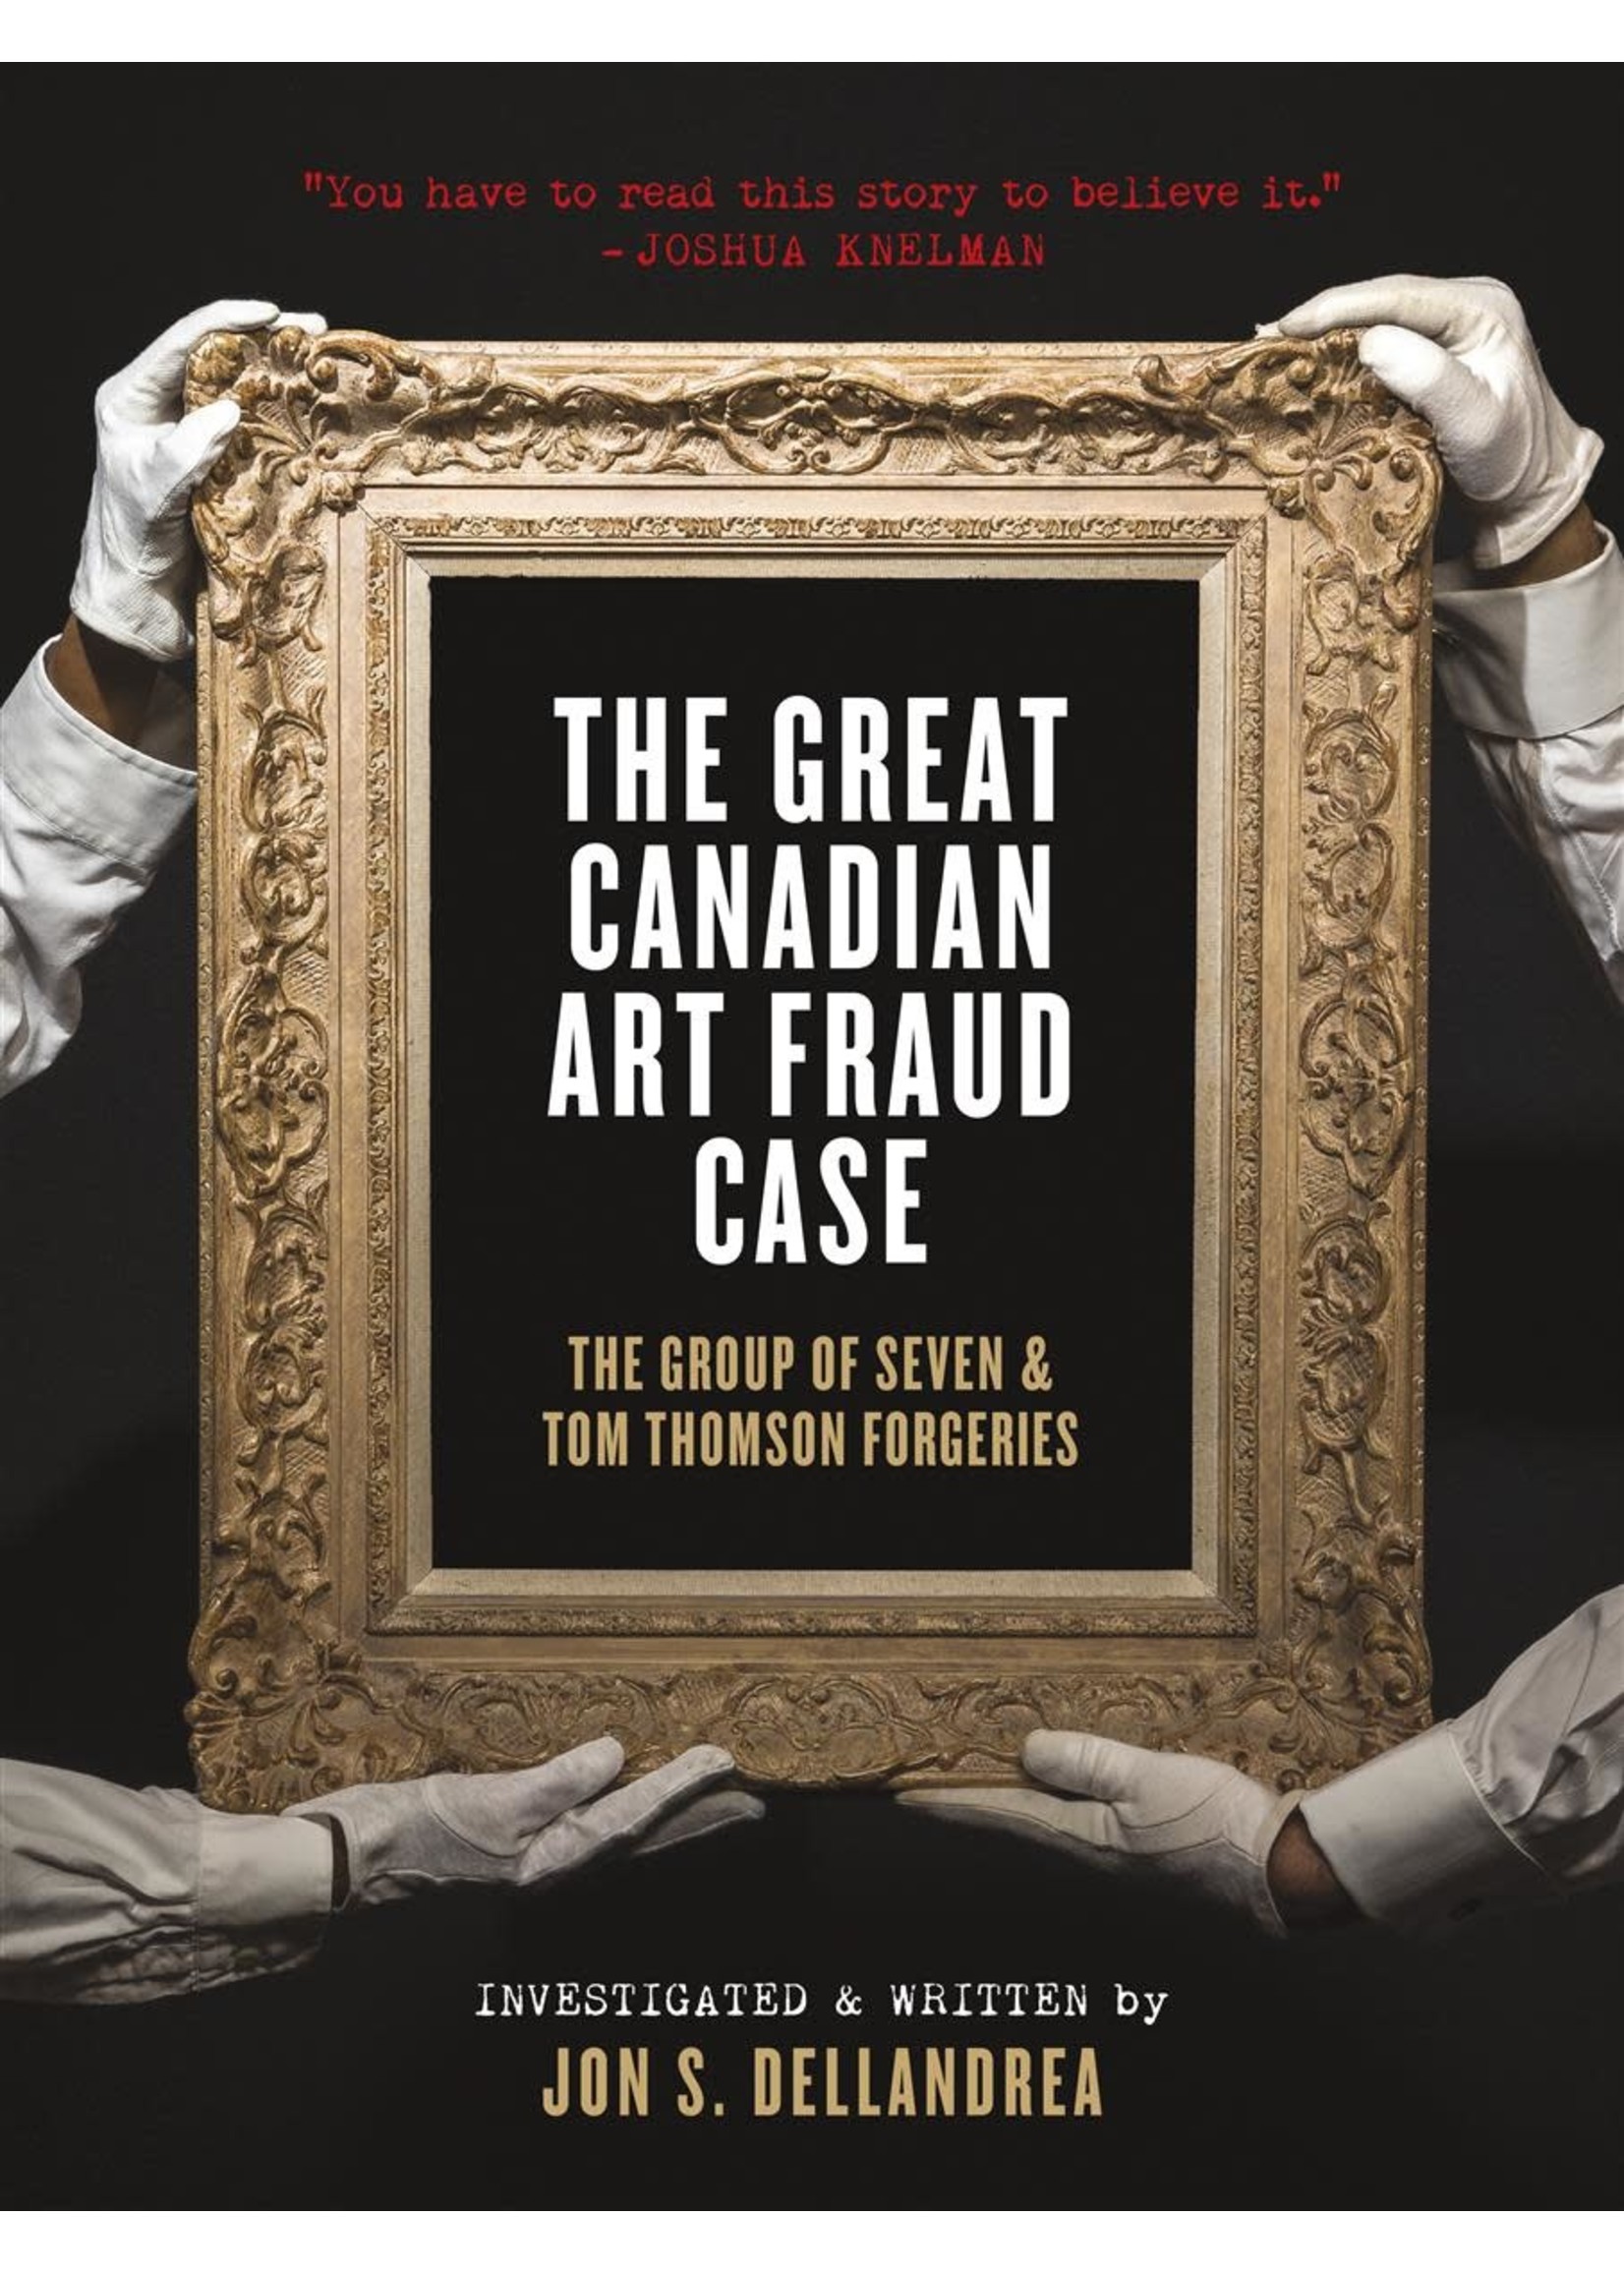 The Great Canadian Art Fraud Case: The Group of Seven and Tom Thomson Forgeries by Jon S. Dellandrea